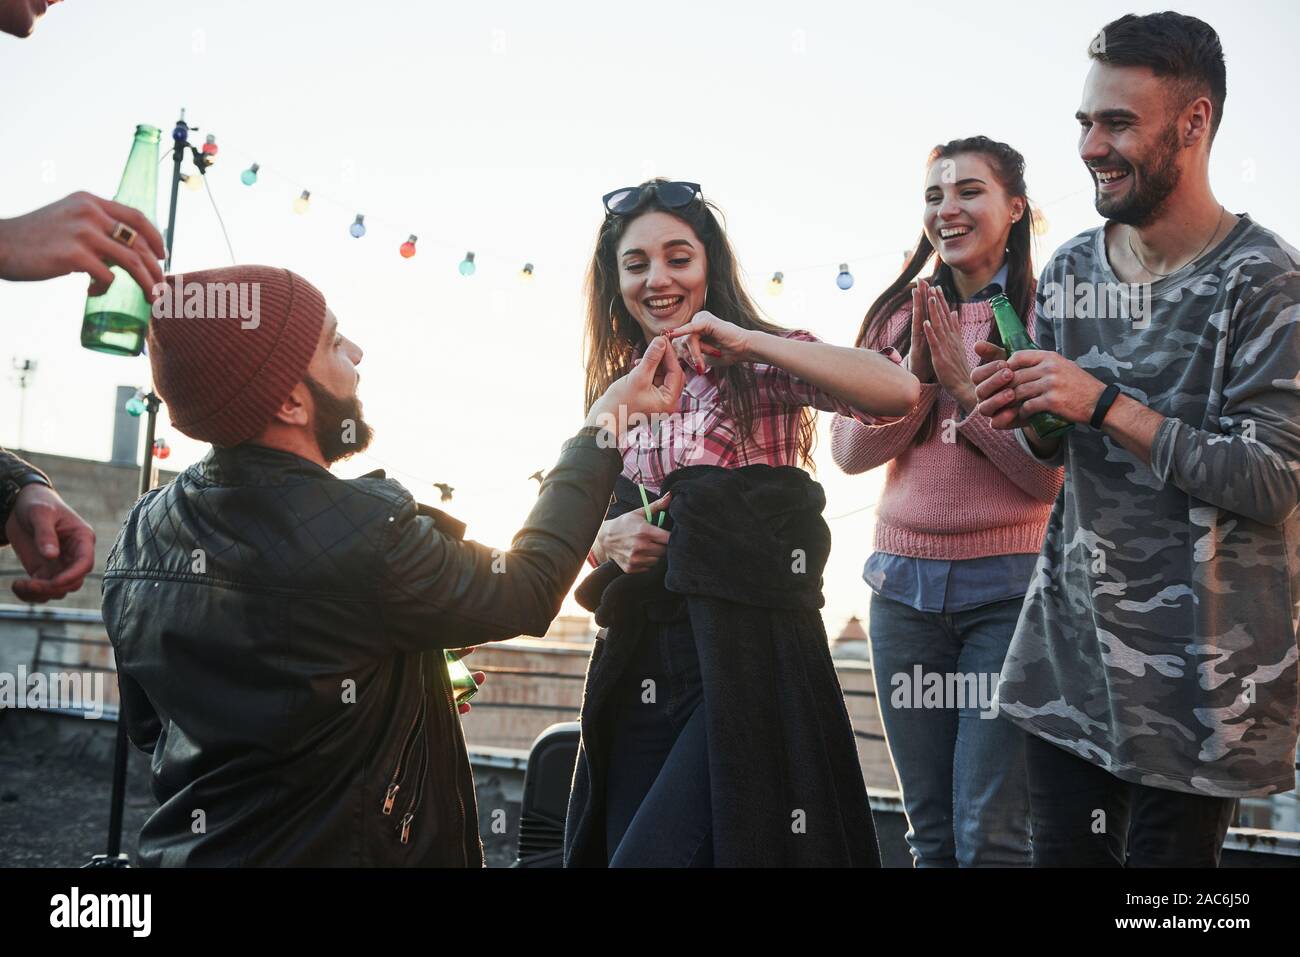 Girl gives her pinky finger. Declaration of love on the rooftop with company of friends Stock Photo